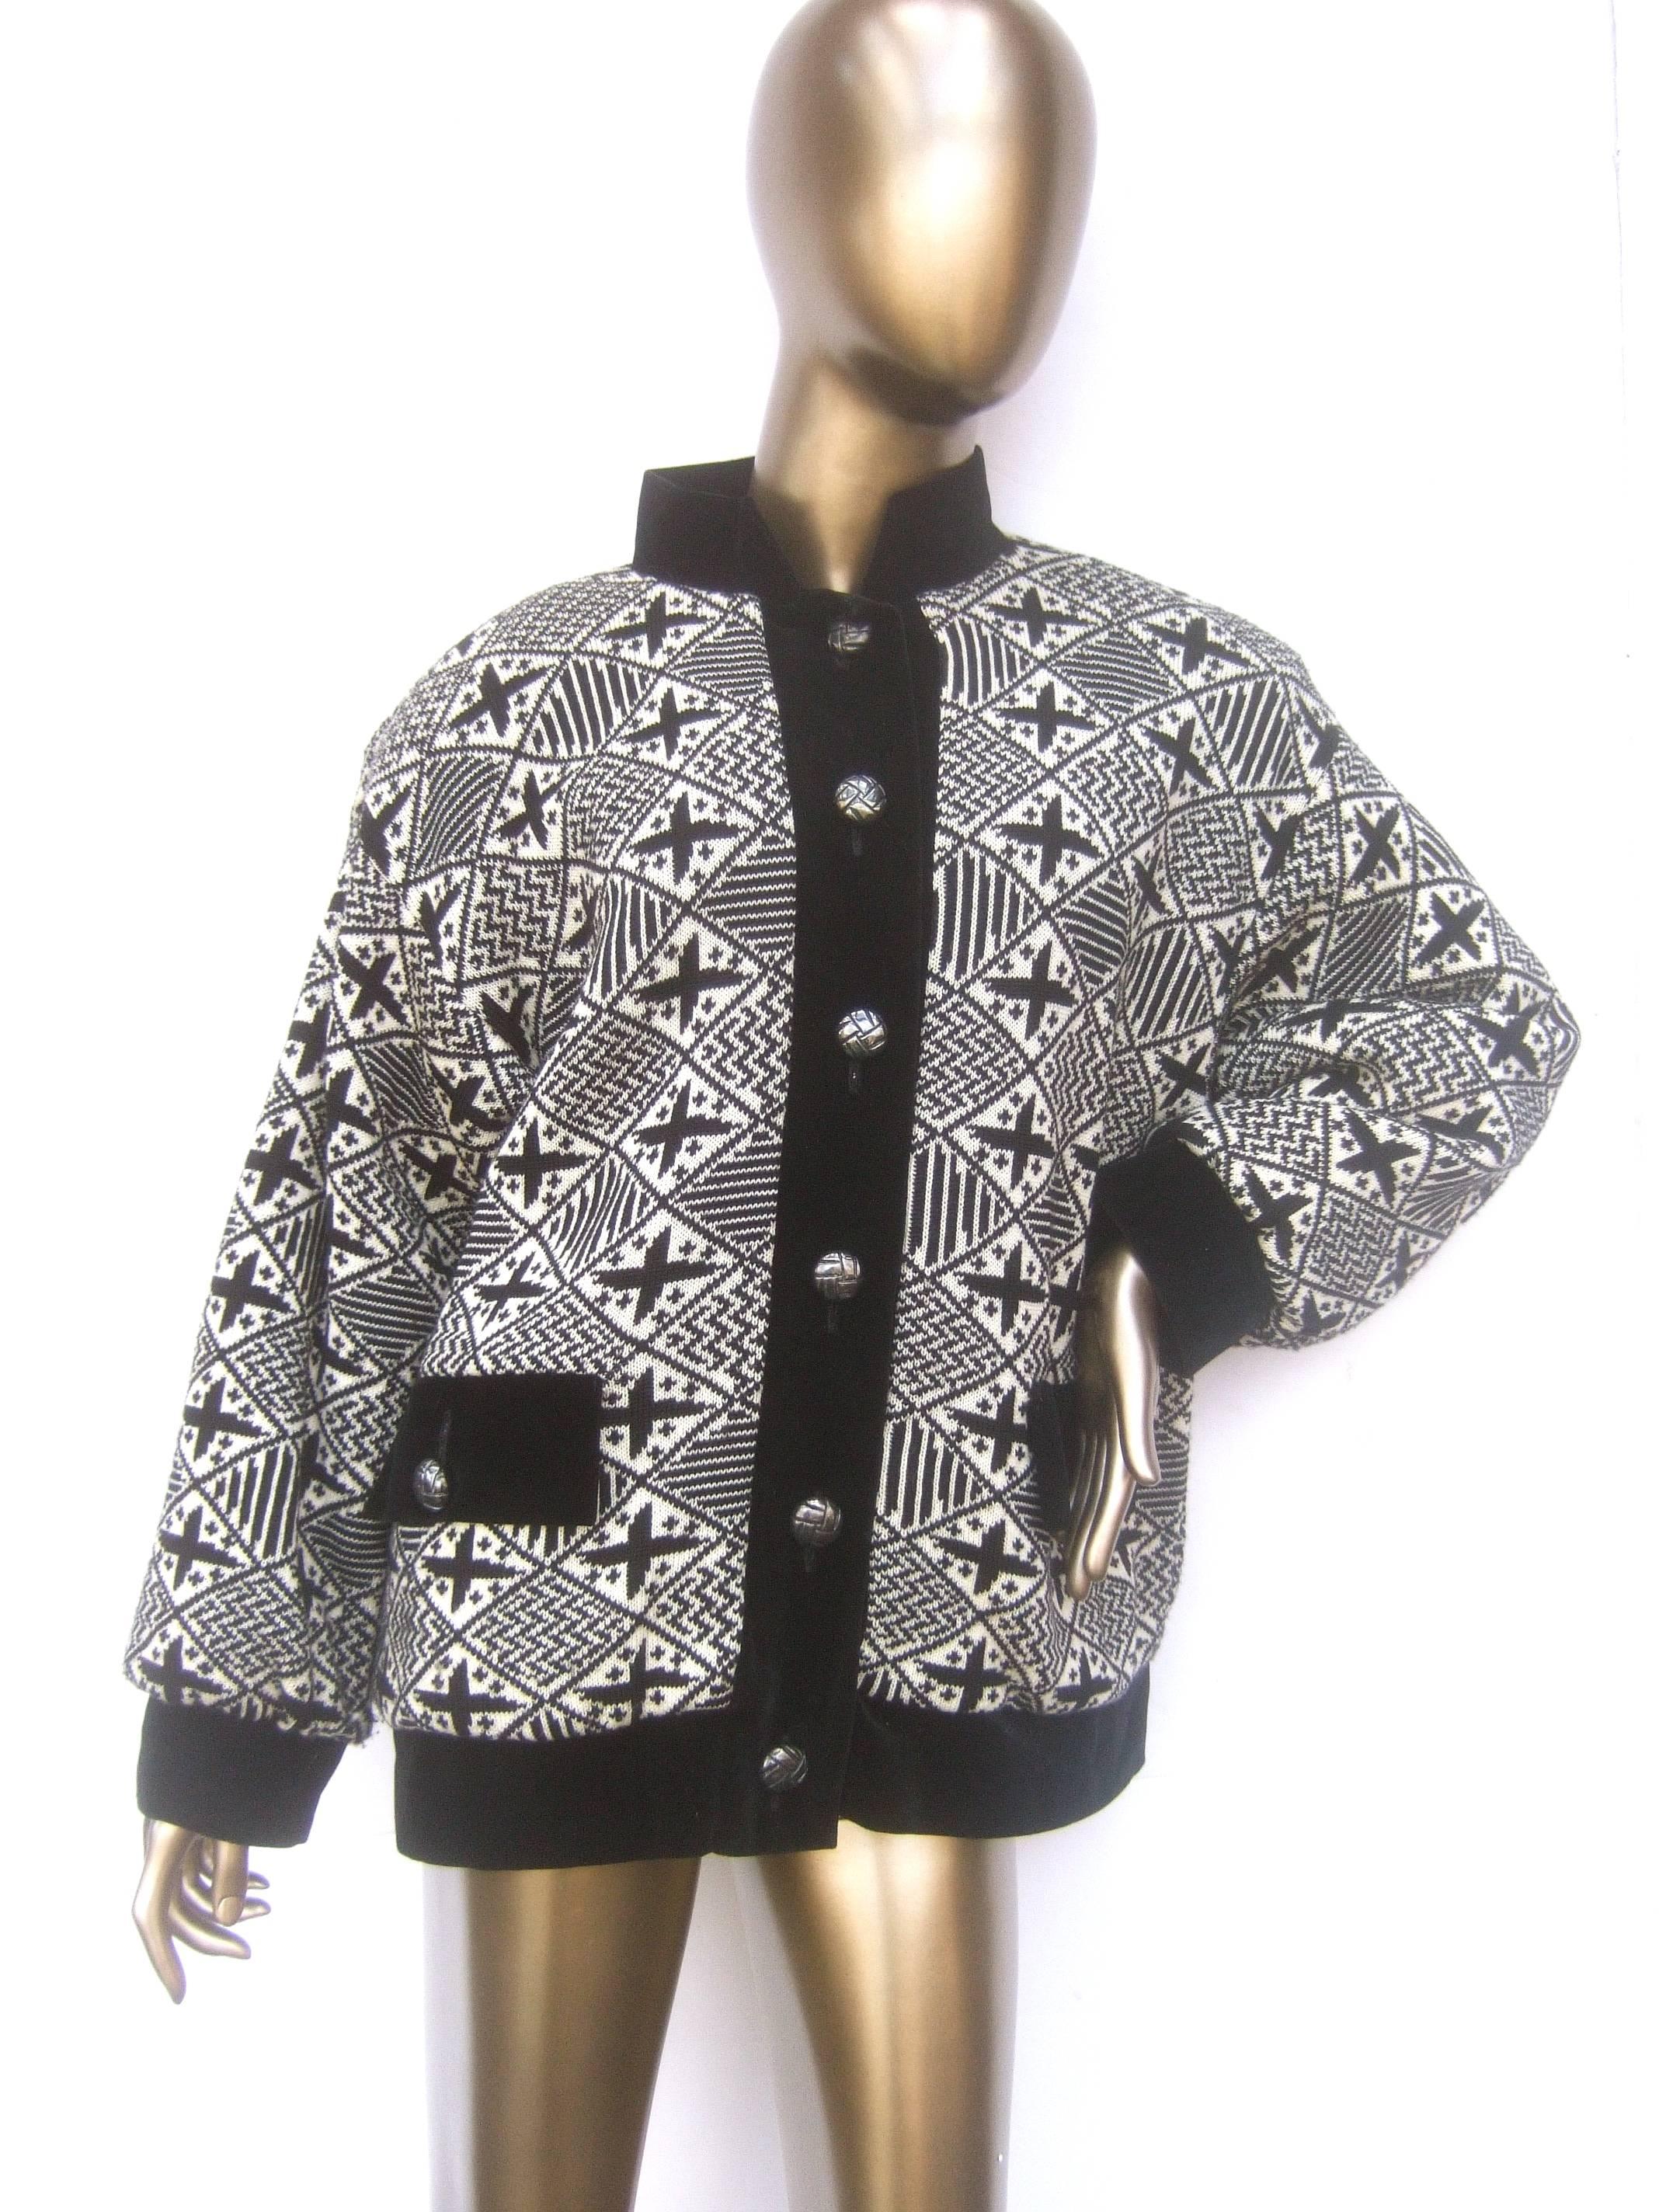 Yves Saint Laurent Rive Gauche geometric wool knit jacket c. 1970s 
The boxy chunky wool knit jacket is designed with a geometric pattern
of black and contrasting white knit. Framed with black velvet border   
trim and matching black velvet nehru